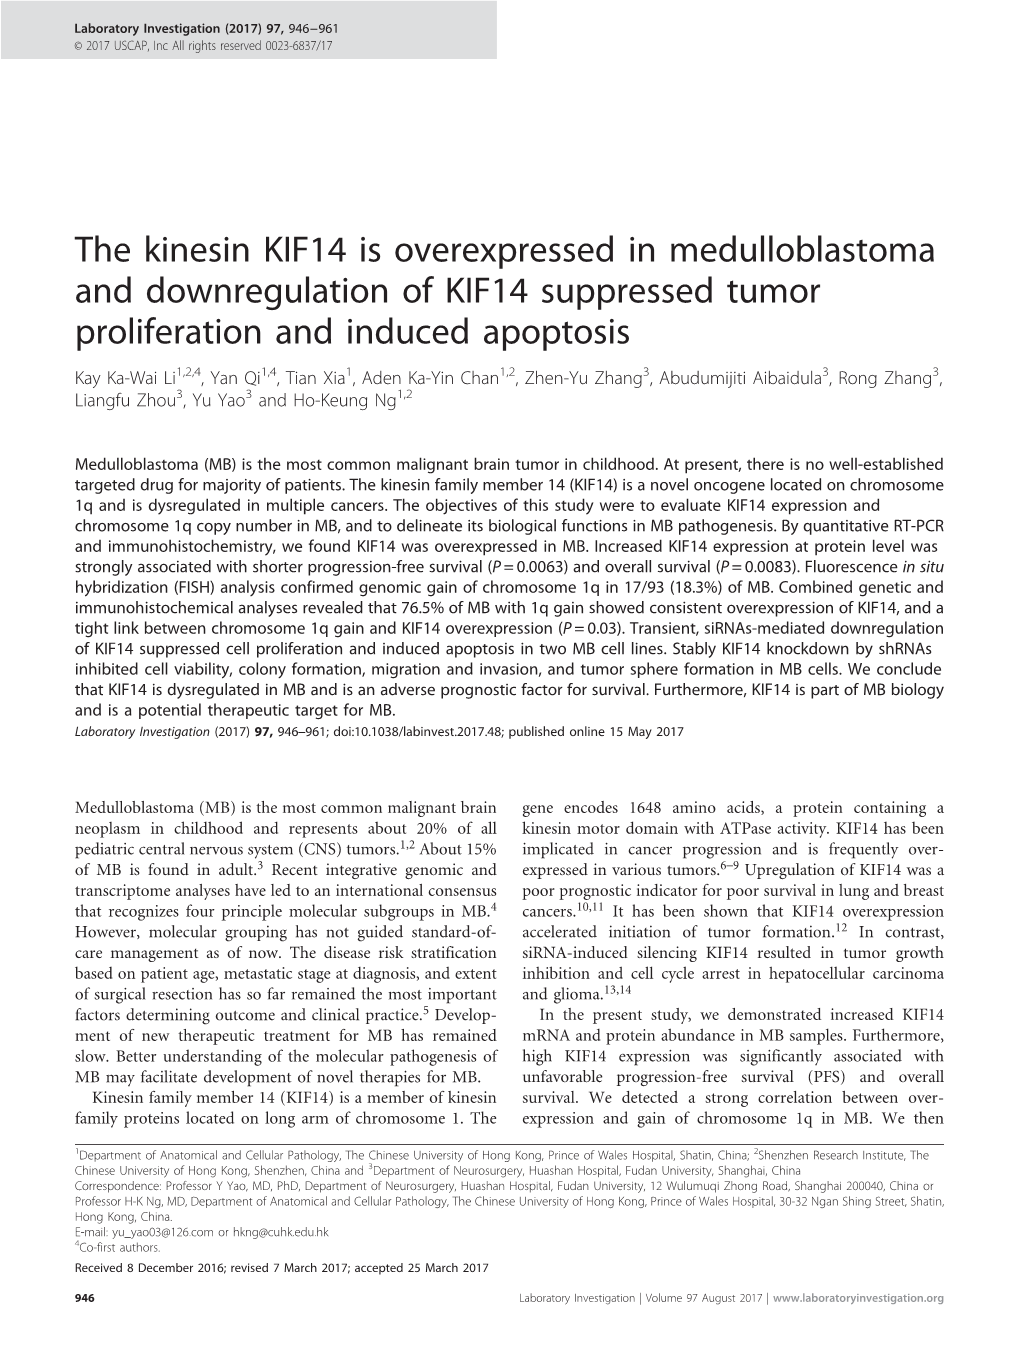 The Kinesin KIF14 Is Overexpressed in Medulloblastoma And